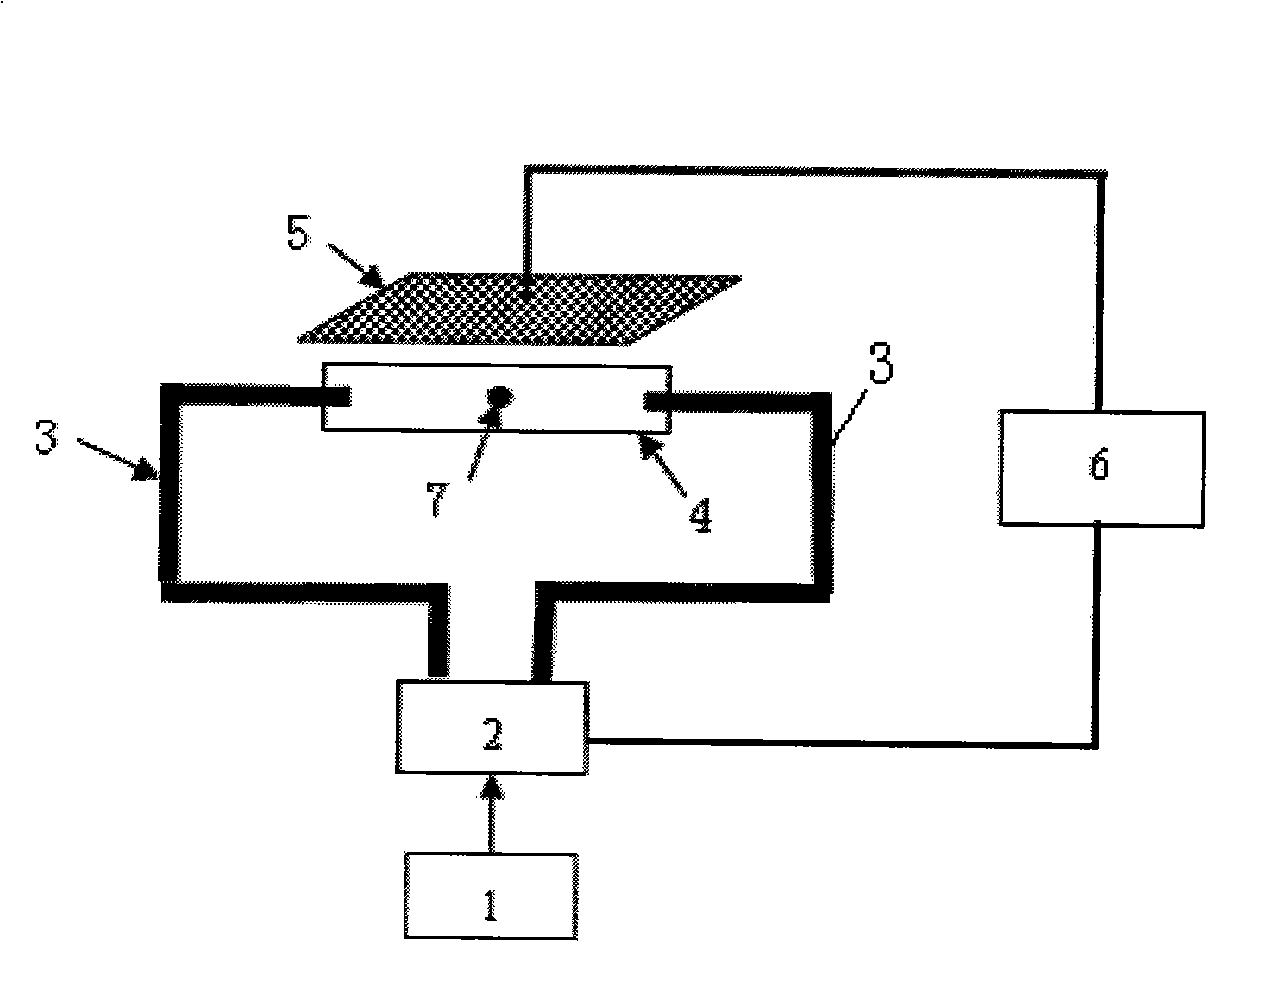 Apparatus for measuring acceleration by double optical beams, optical fibers and light traps